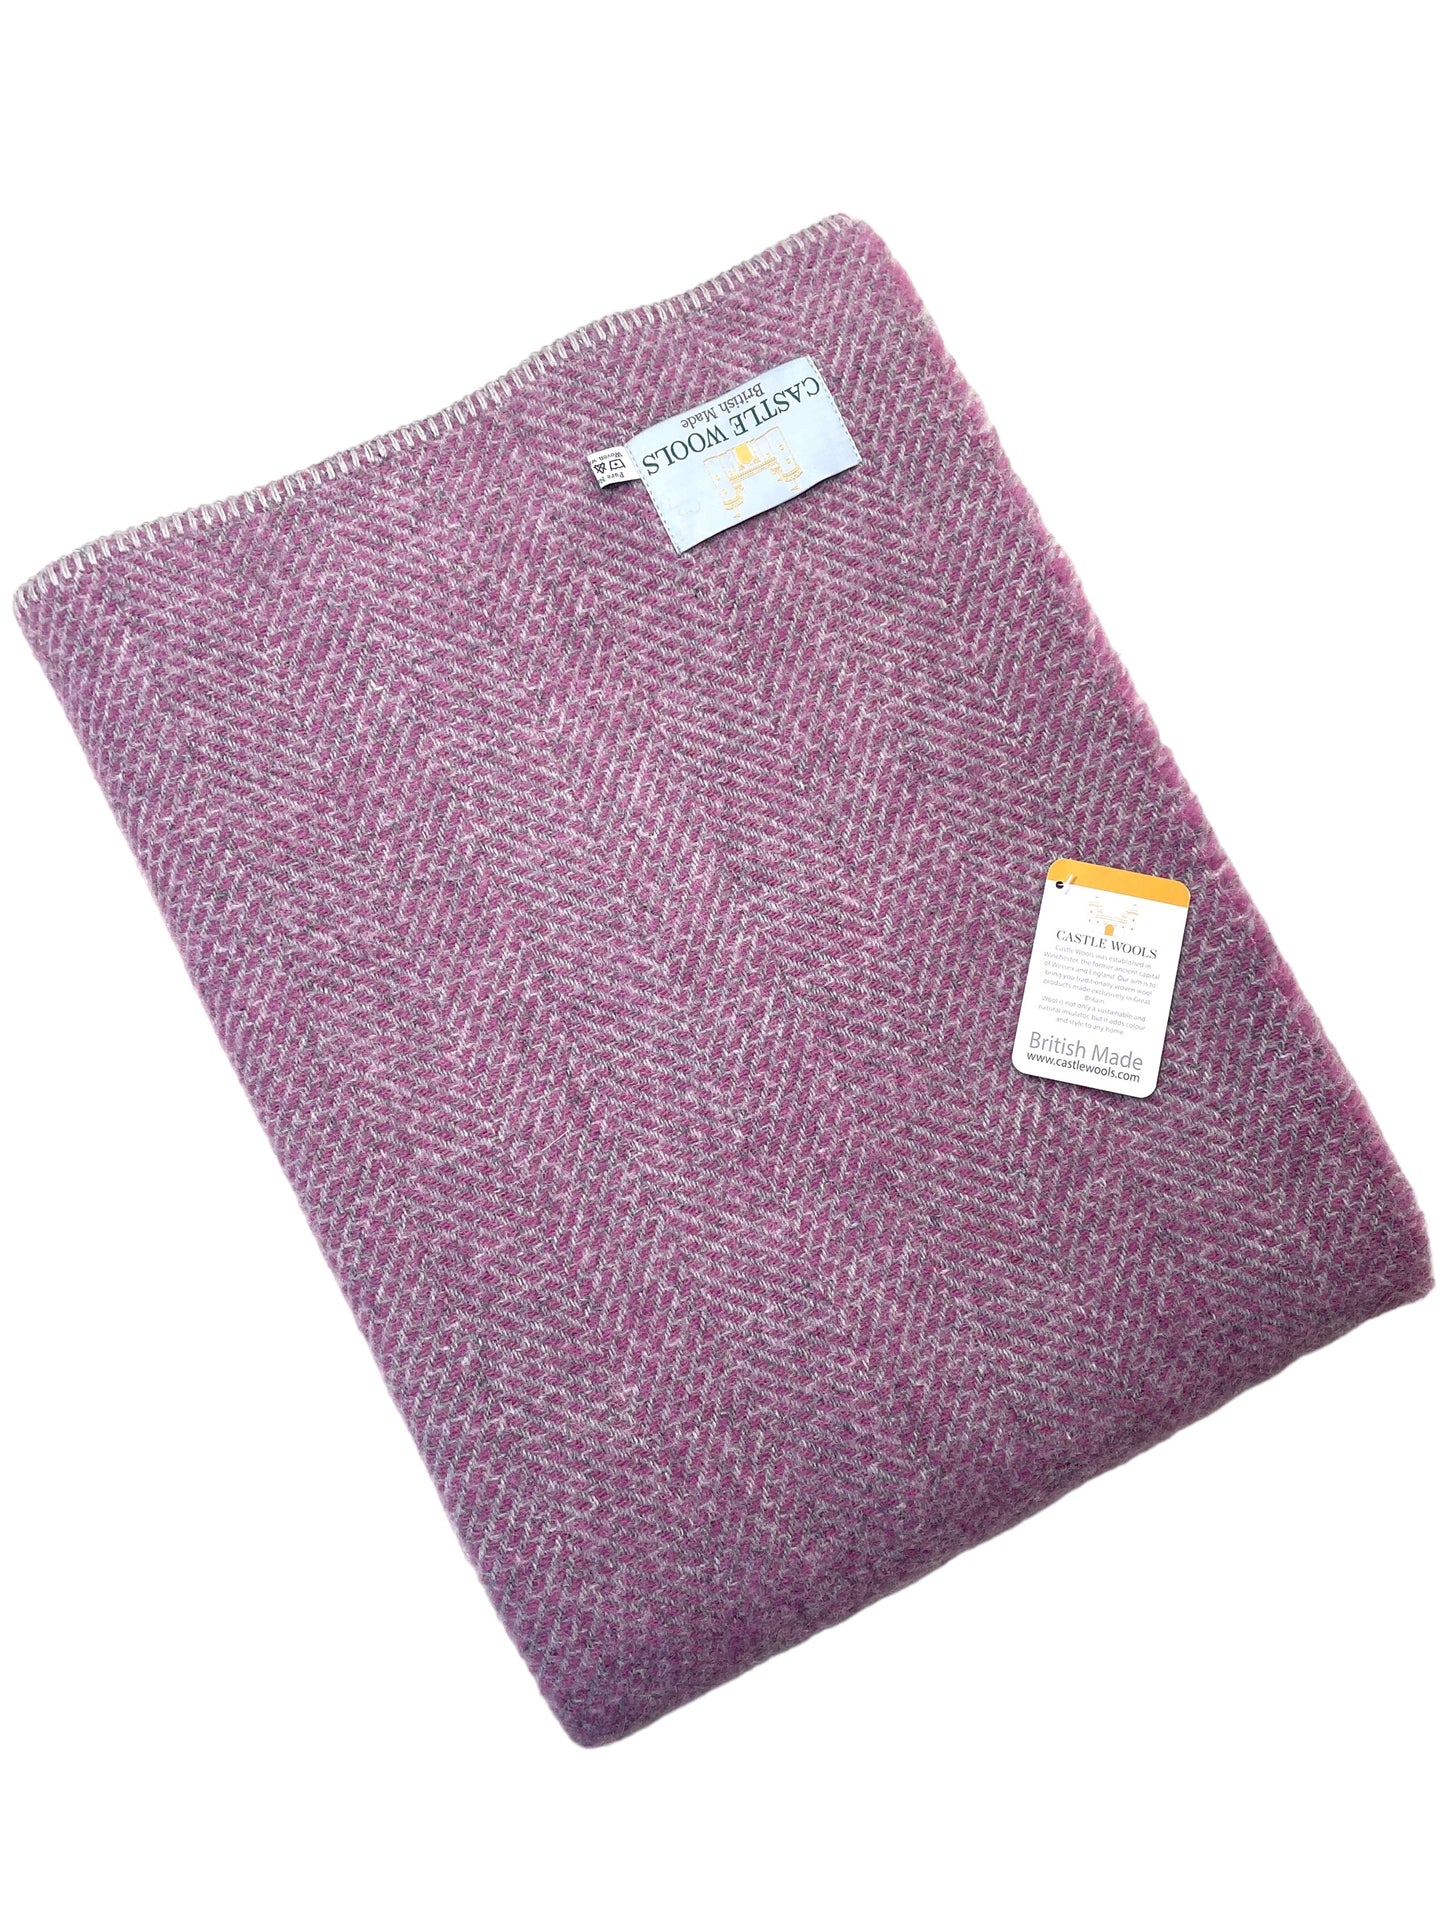 Plum and Silver Grey Wool Throw